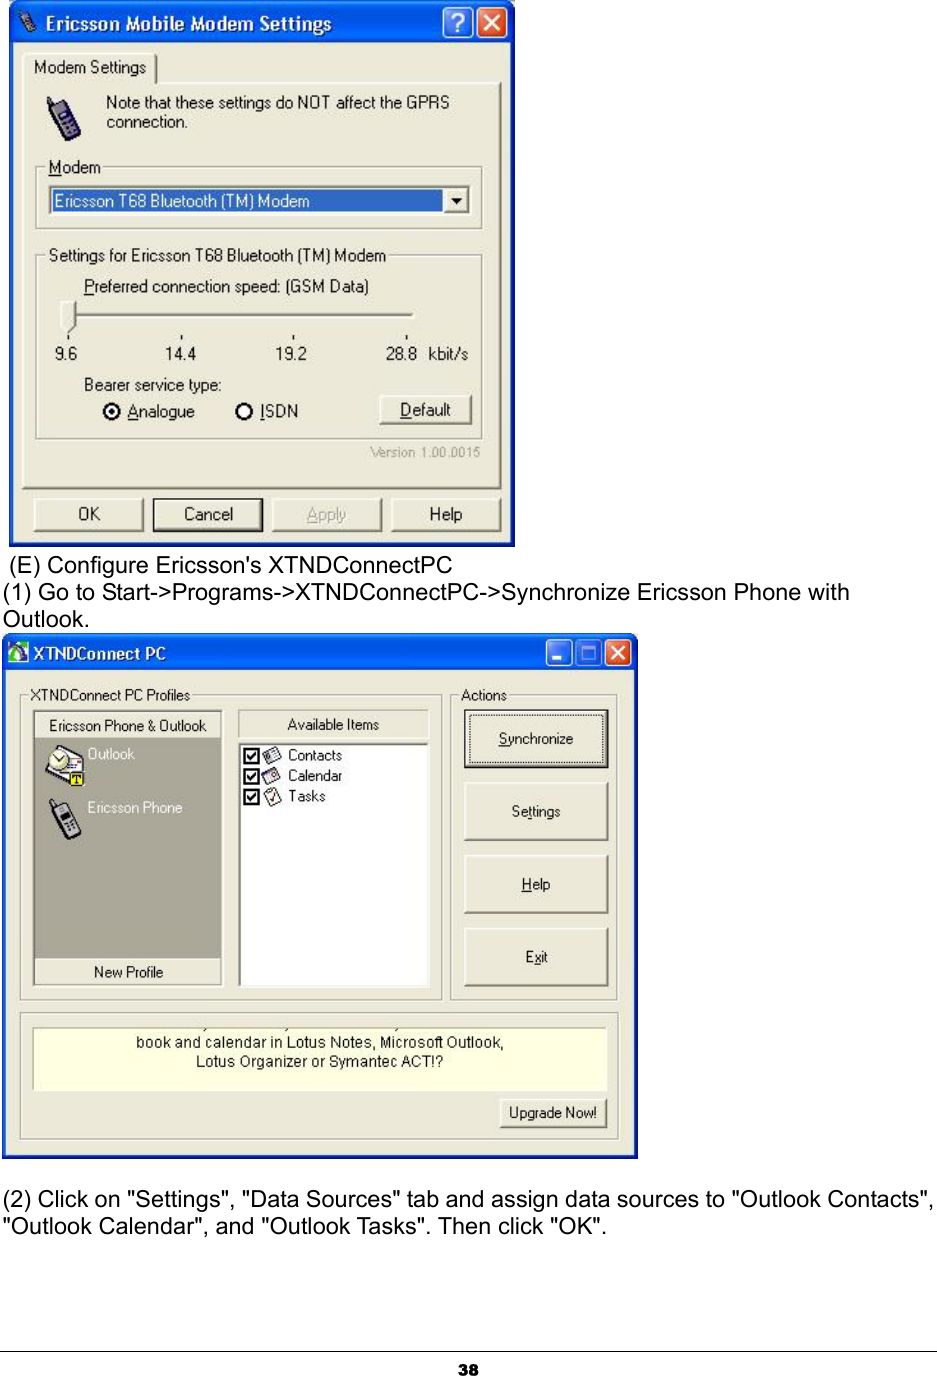  38    (E) Configure Ericsson&apos;s XTNDConnectPC (1) Go to Start-&gt;Programs-&gt;XTNDConnectPC-&gt;Synchronize Ericsson Phone with Outlook.         (2) Click on &quot;Settings&quot;, &quot;Data Sources&quot; tab and assign data sources to &quot;Outlook Contacts&quot;, &quot;Outlook Calendar&quot;, and &quot;Outlook Tasks&quot;. Then click &quot;OK&quot;. 